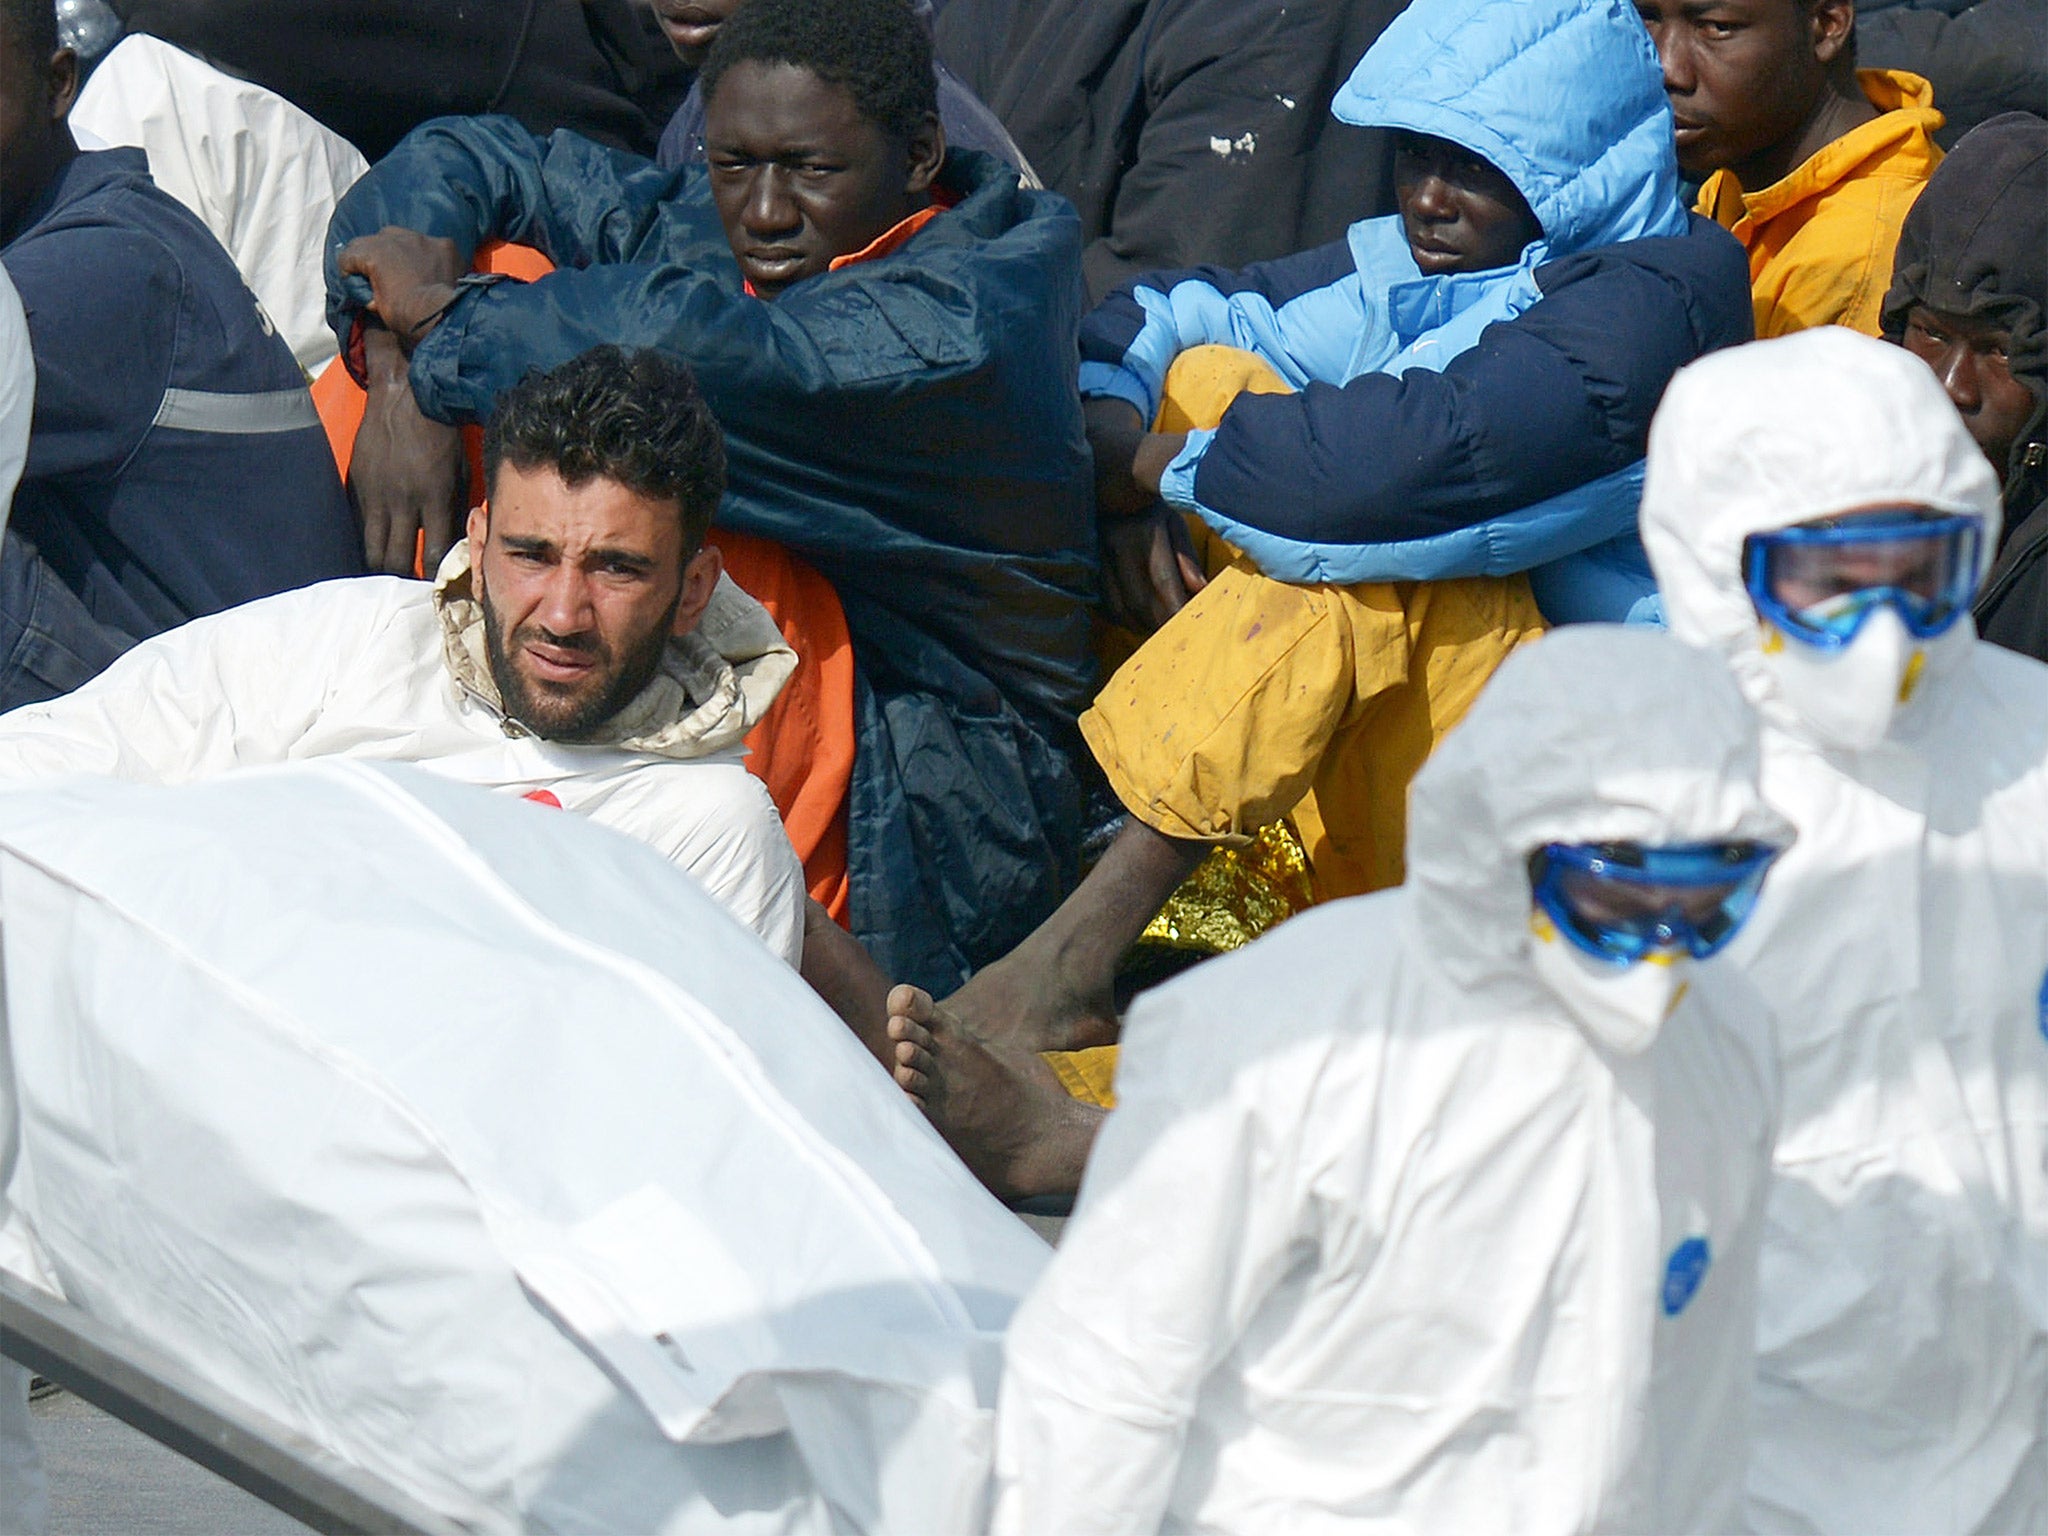 Mohammed Ali Malek, surrounded by some of his surviving ‘cargo’ of migrants after their rescue off Libya, watches rescuers carry a body from an Italian Coast Guard vessel in Malta